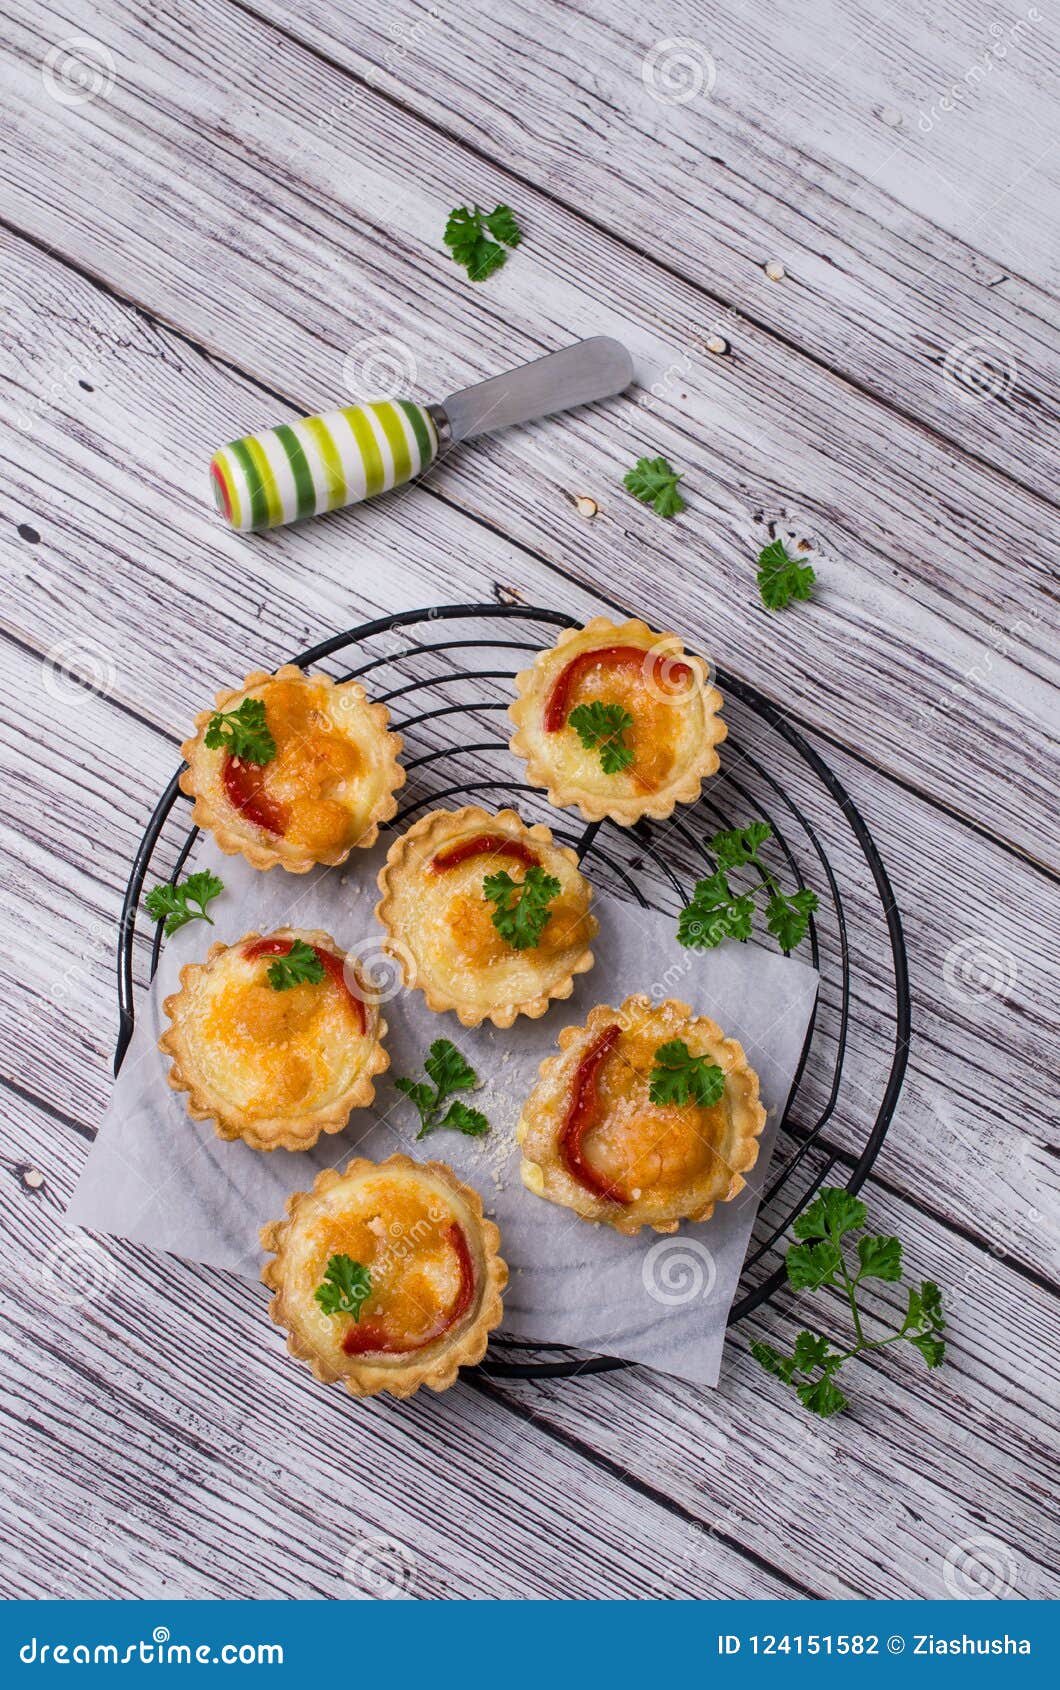 Tartlets with vegetables stock photo. Image of breakfast - 124151582